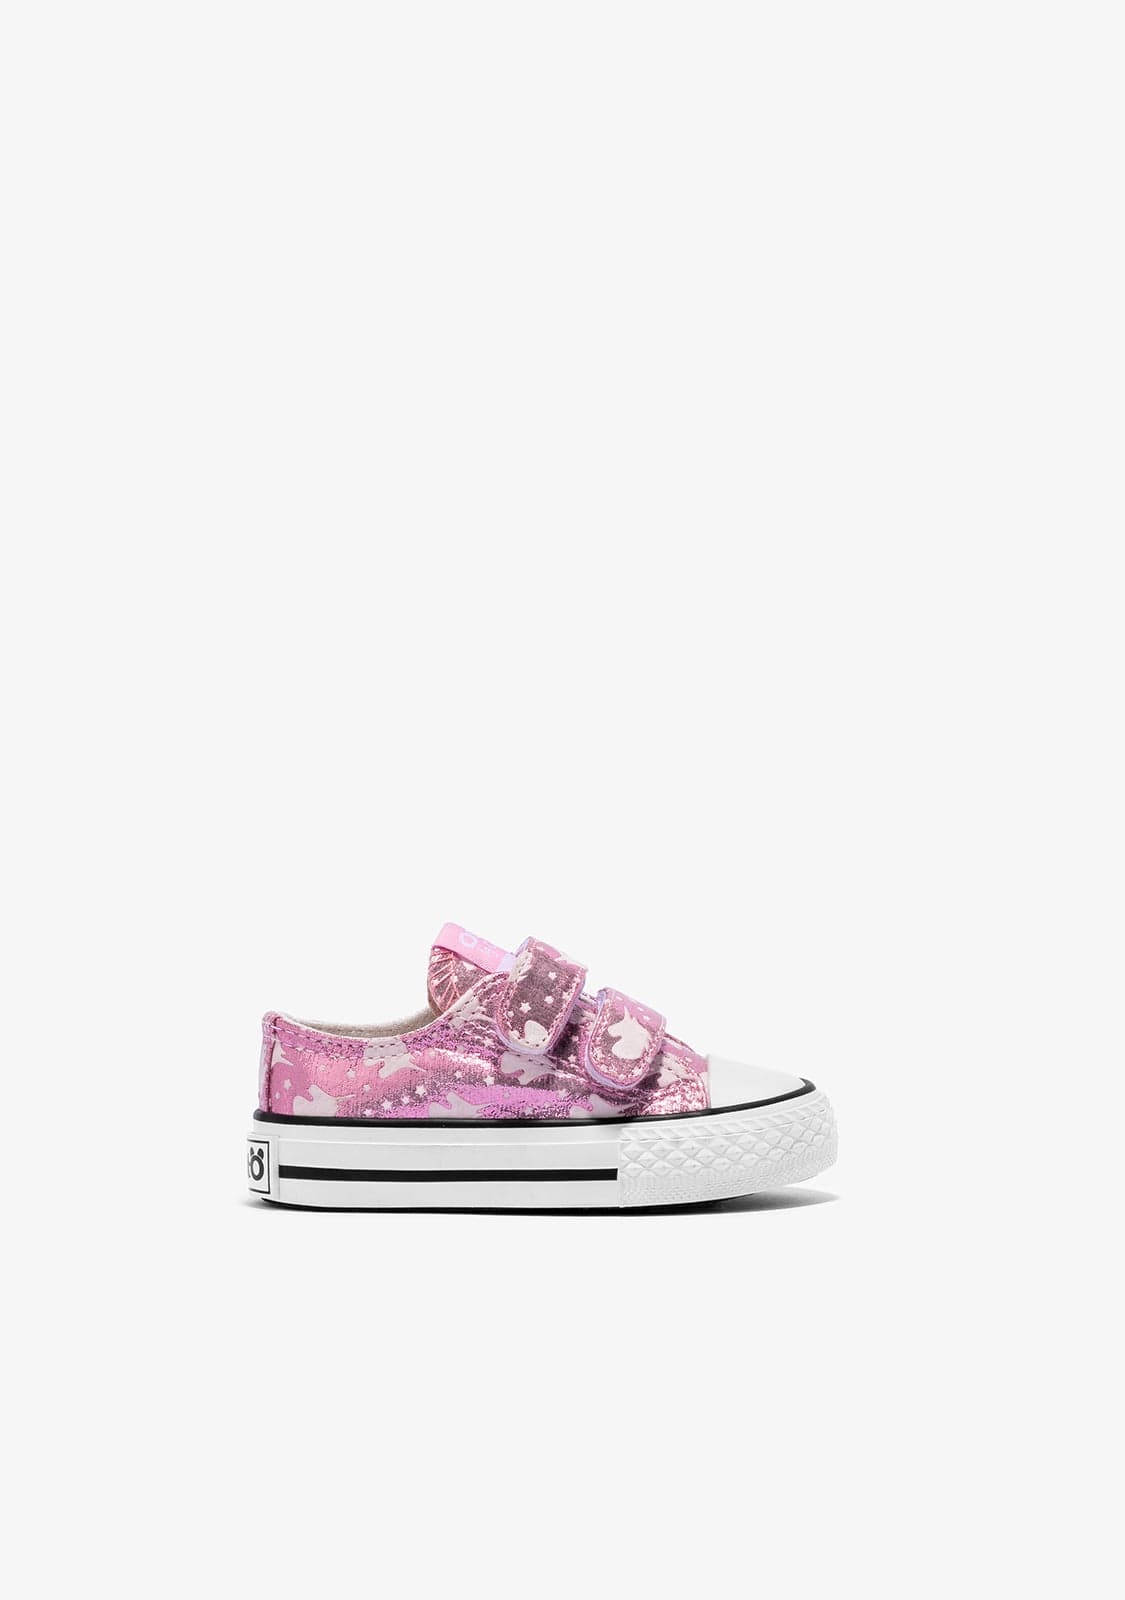 OSITO Shoes Baby's Pink Glows in the Dark Sneakers Canvas